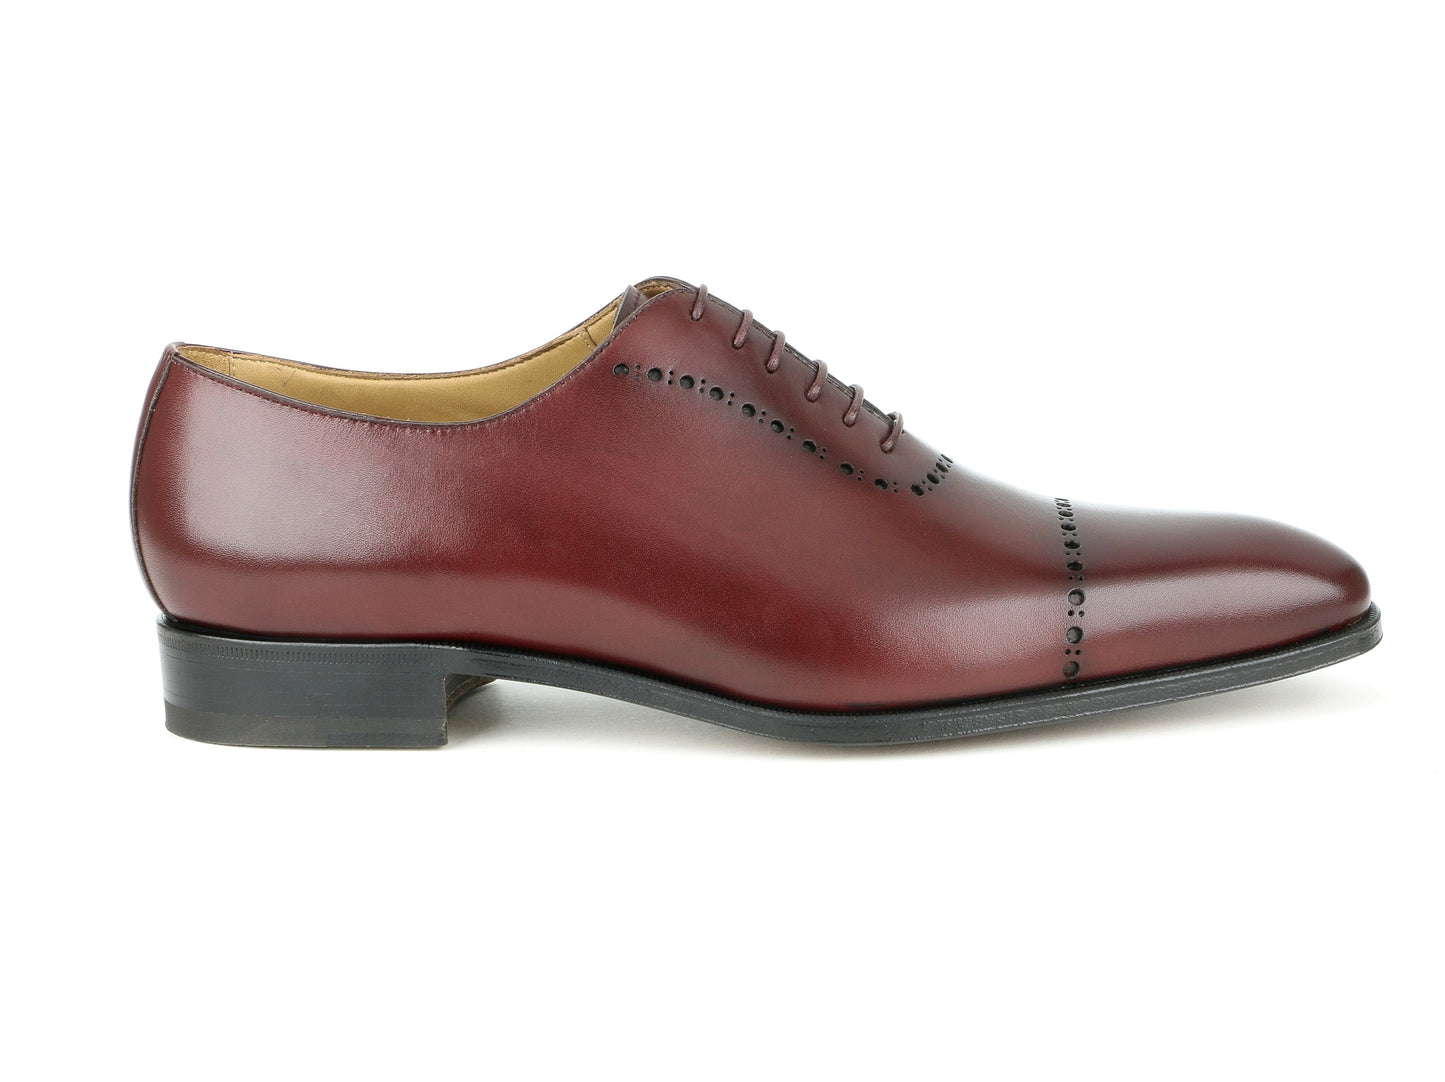 GIORGIO - Leather Oxford punch holed